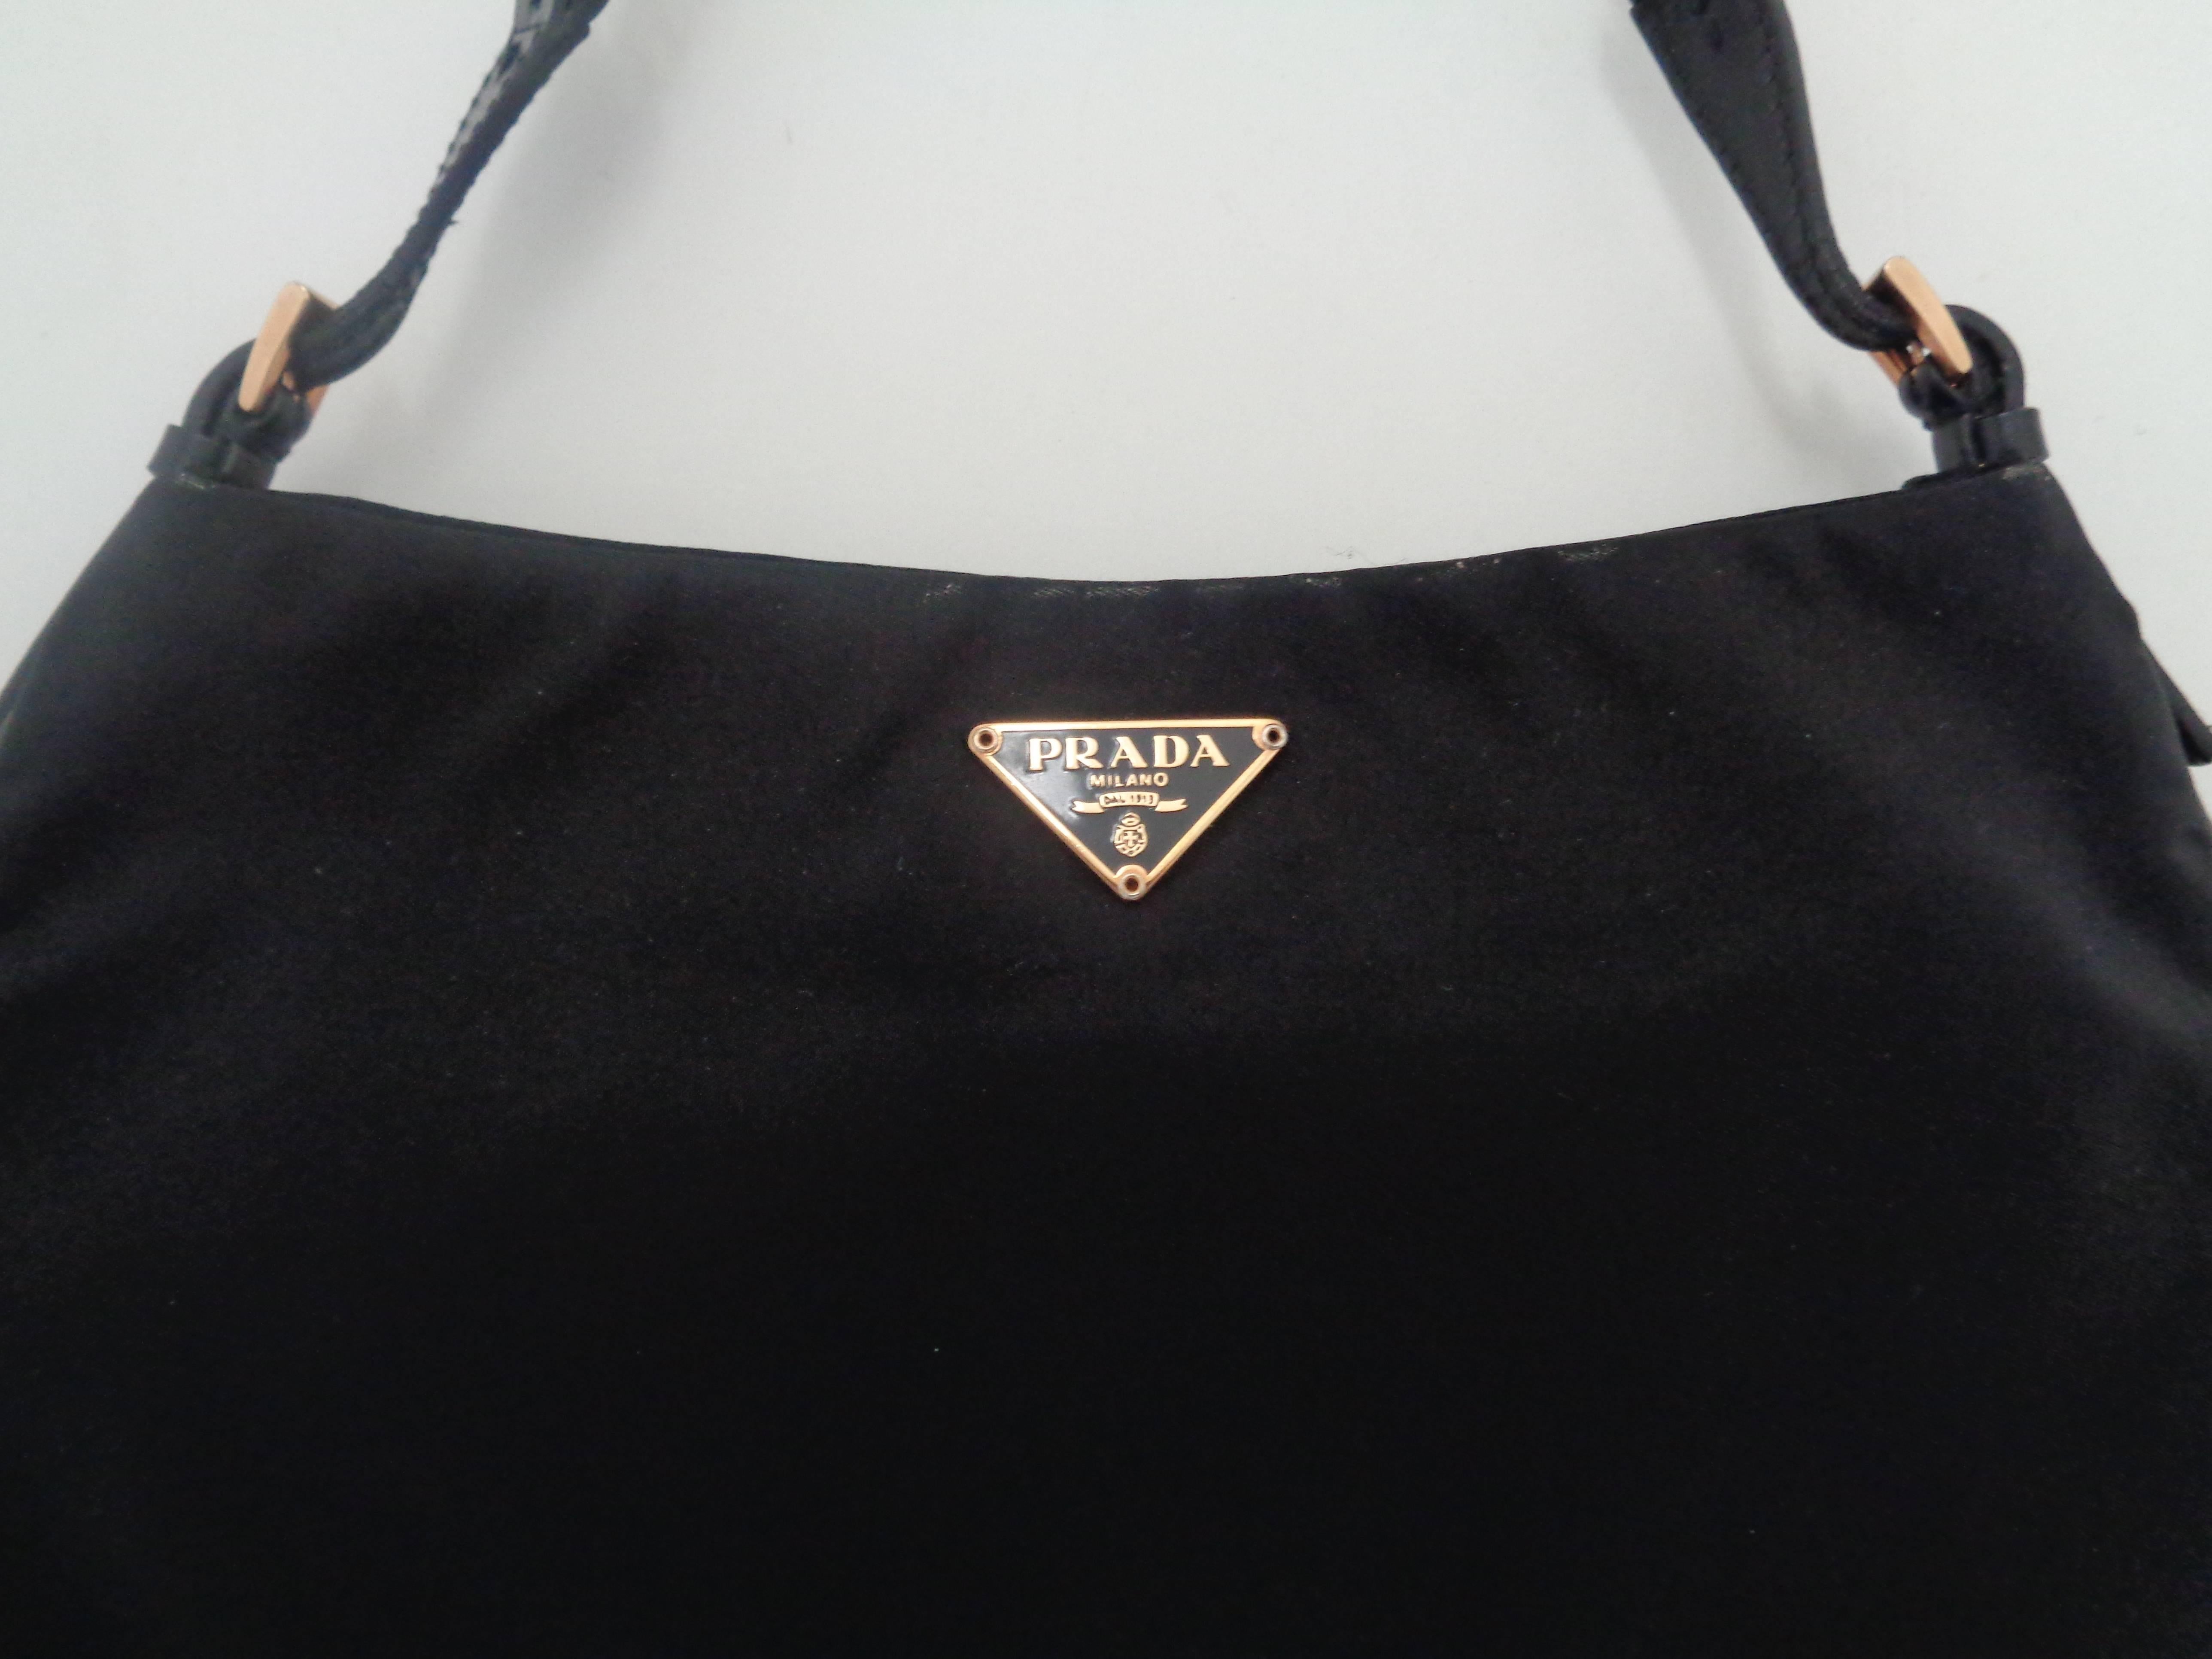 Prada Black Canvas Gold Tone Chain Shoulder Bag
totally made in italy